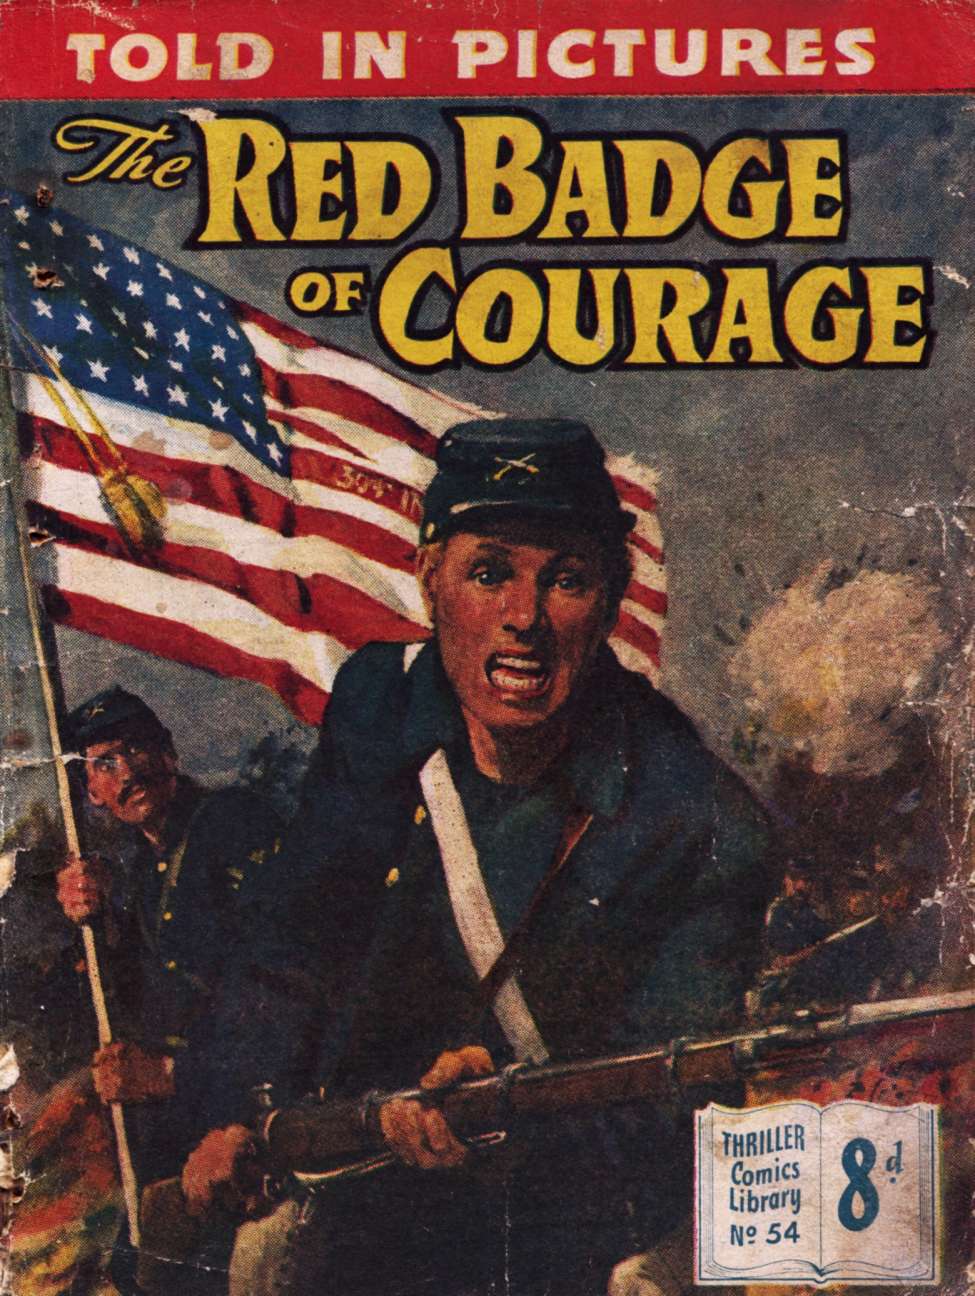 Book Cover For Thriller Comics Library 54 - Red Badge of Courage